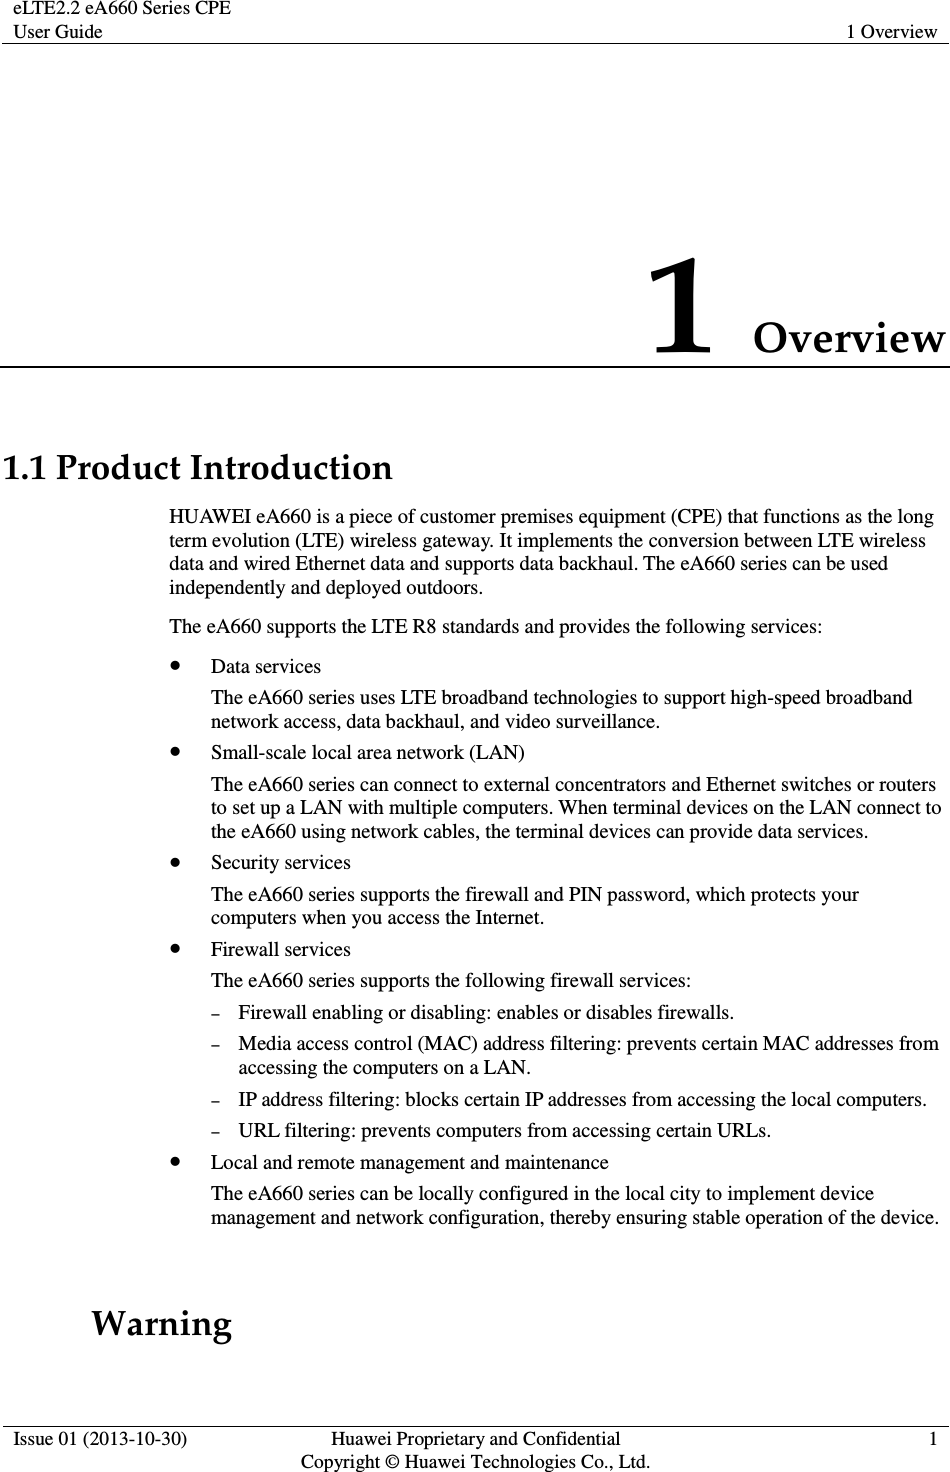 eLTE2.2 eA660 Series CPE User Guide  1 Overview  Issue 01 (2013-10-30)  Huawei Proprietary and Confidential                                     Copyright © Huawei Technologies Co., Ltd. 1  1 Overview 1.1 Product Introduction HUAWEI eA660 is a piece of customer premises equipment (CPE) that functions as the long term evolution (LTE) wireless gateway. It implements the conversion between LTE wireless data and wired Ethernet data and supports data backhaul. The eA660 series can be used independently and deployed outdoors.   The eA660 supports the LTE R8 standards and provides the following services:  Data services The eA660 series uses LTE broadband technologies to support high-speed broadband network access, data backhaul, and video surveillance.  Small-scale local area network (LAN) The eA660 series can connect to external concentrators and Ethernet switches or routers to set up a LAN with multiple computers. When terminal devices on the LAN connect to the eA660 using network cables, the terminal devices can provide data services.    Security services The eA660 series supports the firewall and PIN password, which protects your computers when you access the Internet.  Firewall services The eA660 series supports the following firewall services: − Firewall enabling or disabling: enables or disables firewalls. − Media access control (MAC) address filtering: prevents certain MAC addresses from accessing the computers on a LAN. − IP address filtering: blocks certain IP addresses from accessing the local computers. − URL filtering: prevents computers from accessing certain URLs.  Local and remote management and maintenance The eA660 series can be locally configured in the local city to implement device management and network configuration, thereby ensuring stable operation of the device.            Warning 